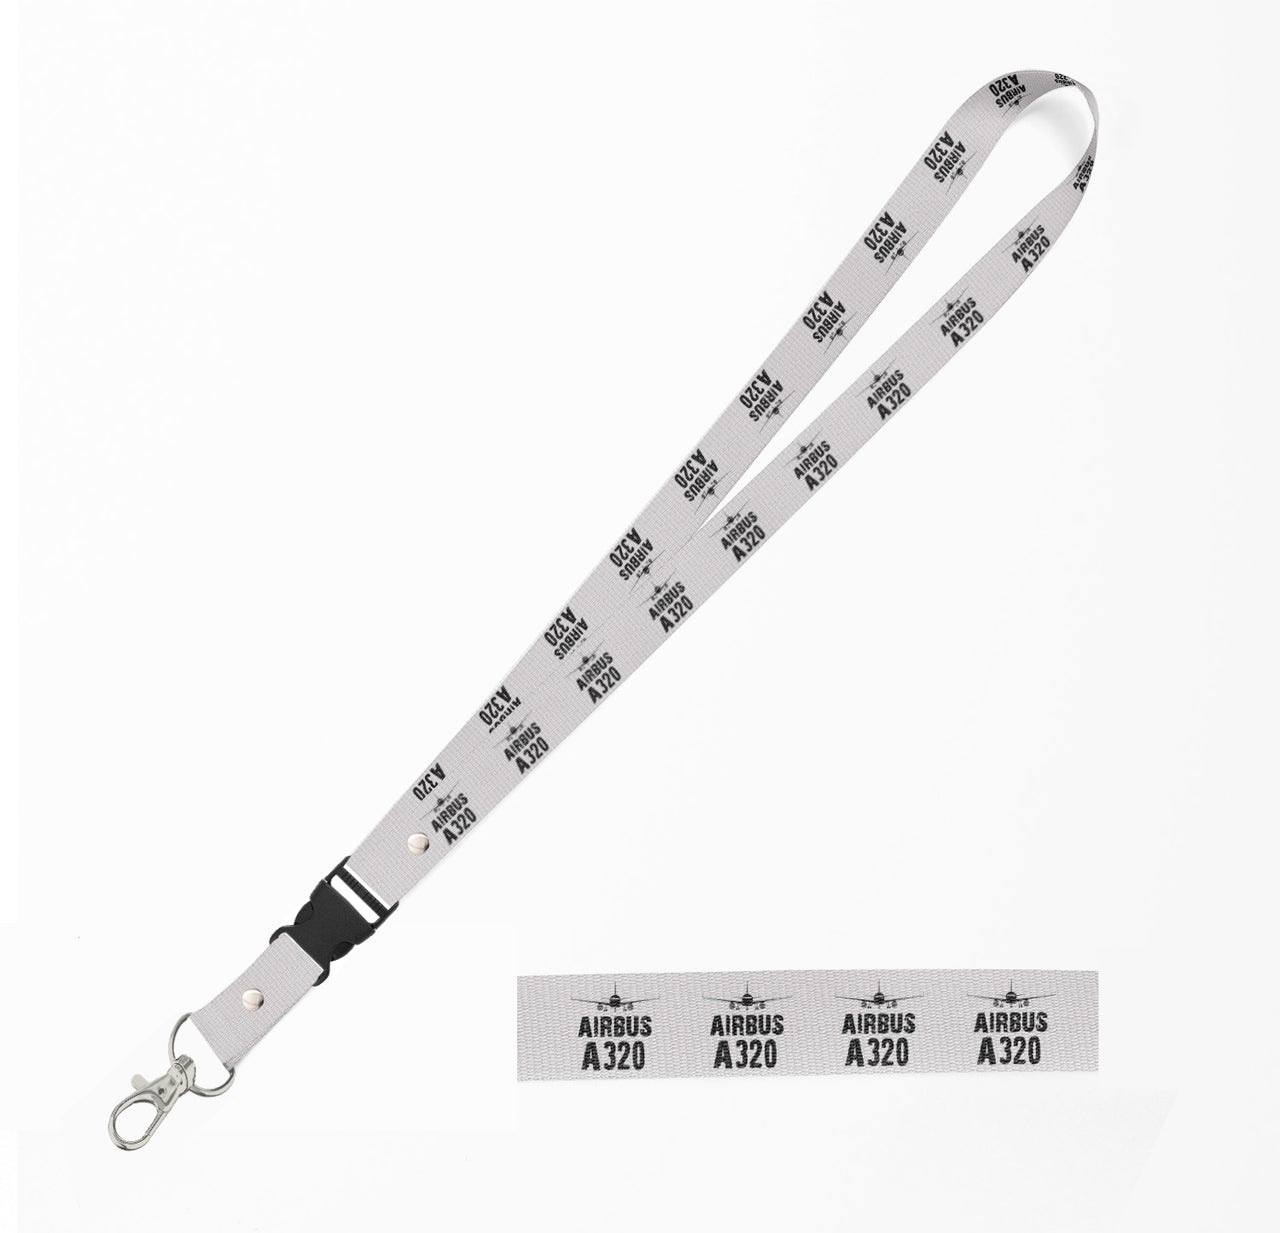 Airbus A320 & Plane Designed Detachable Lanyard & ID Holders